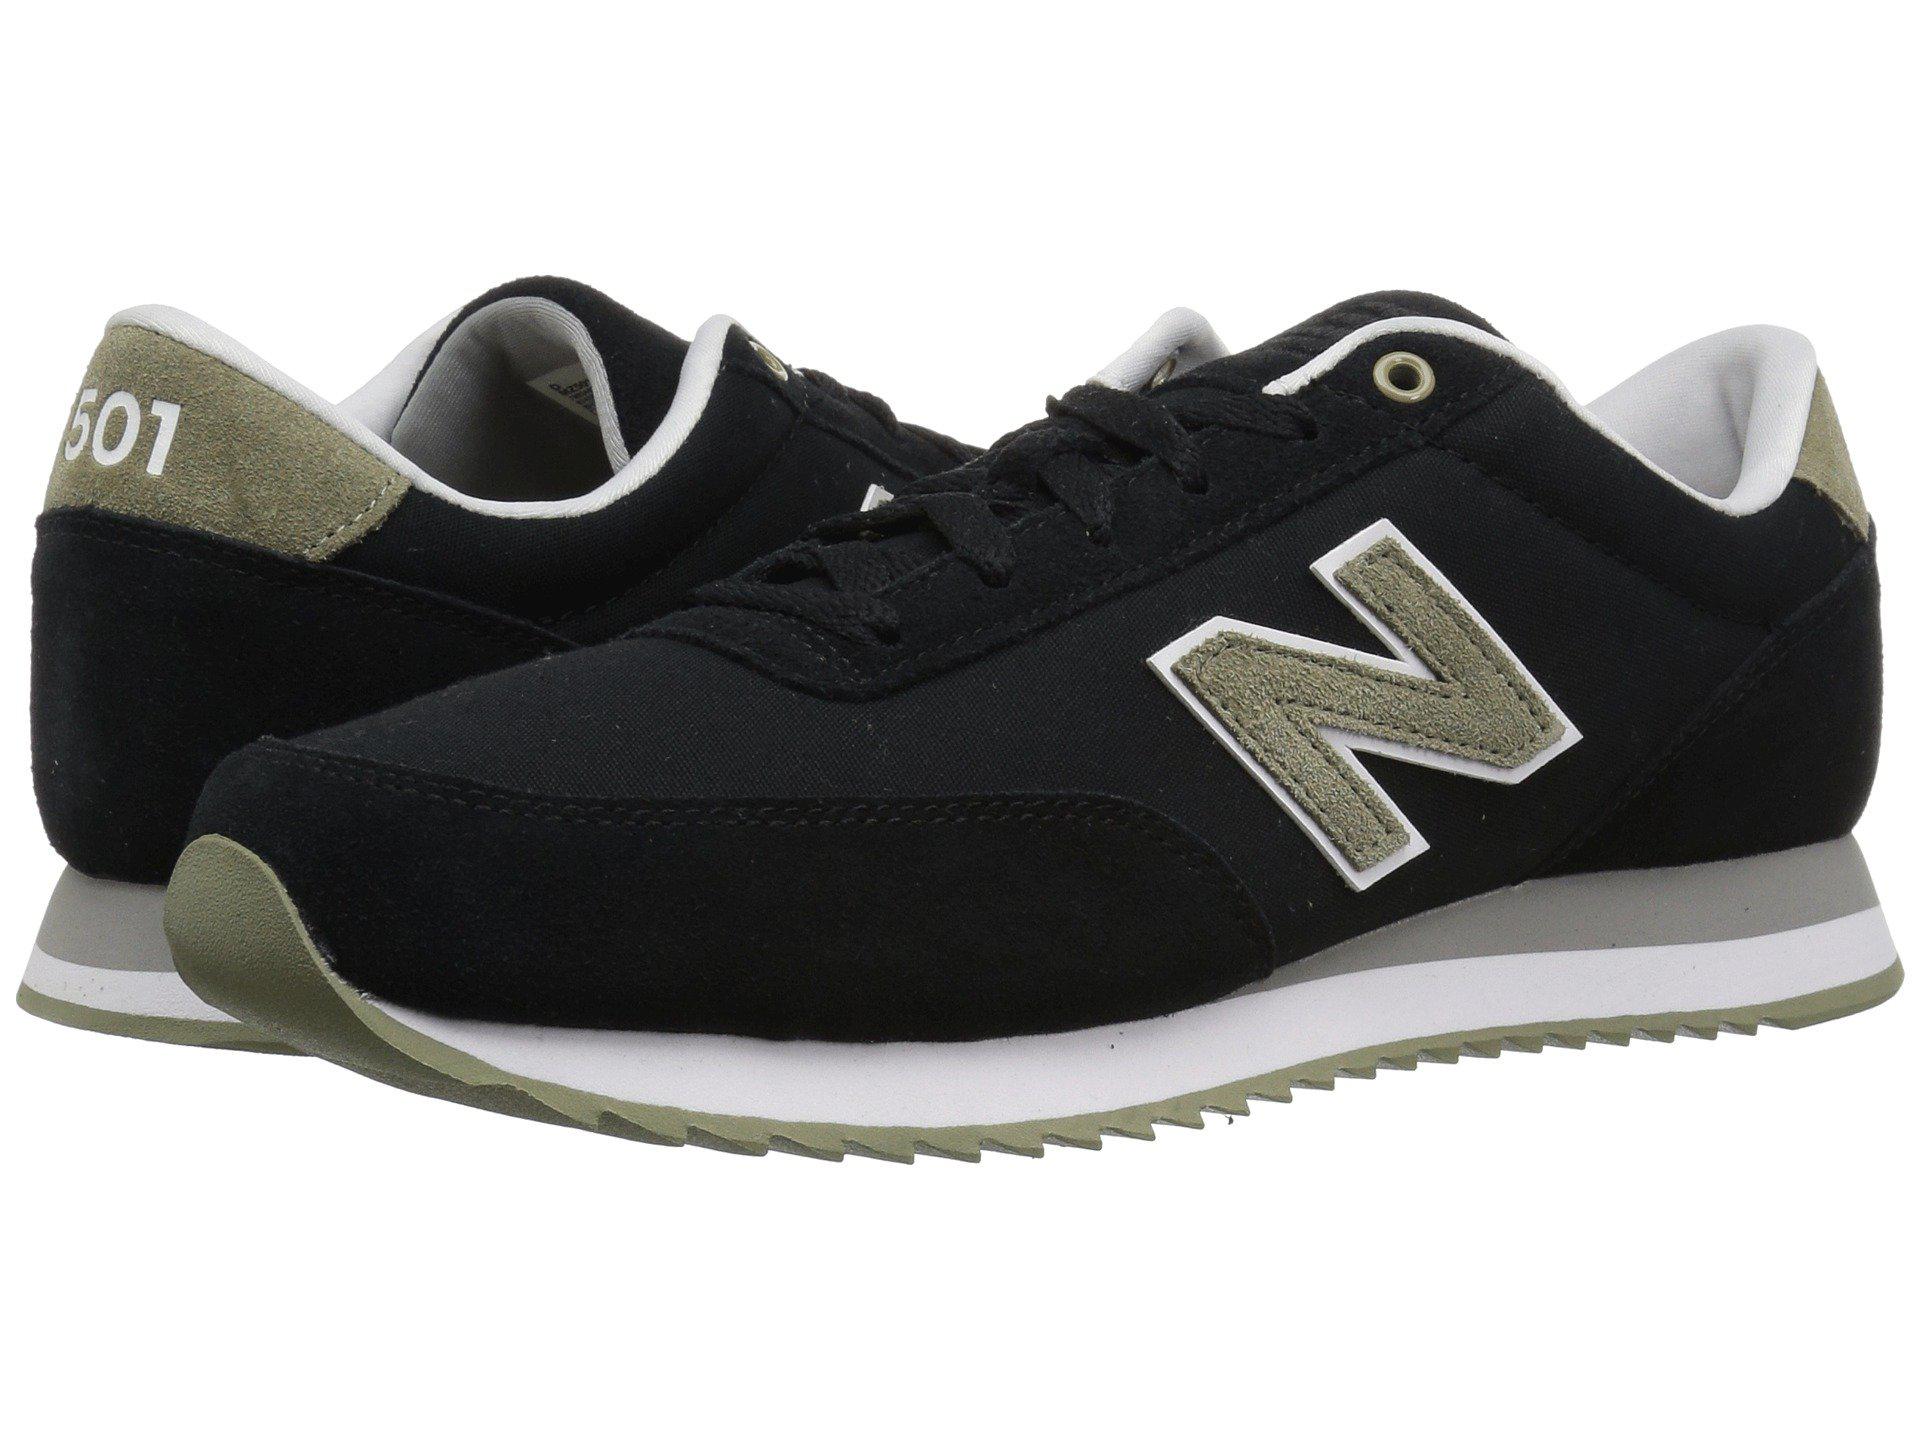 New Balance Mz501 Online Sale, UP TO 70% OFF